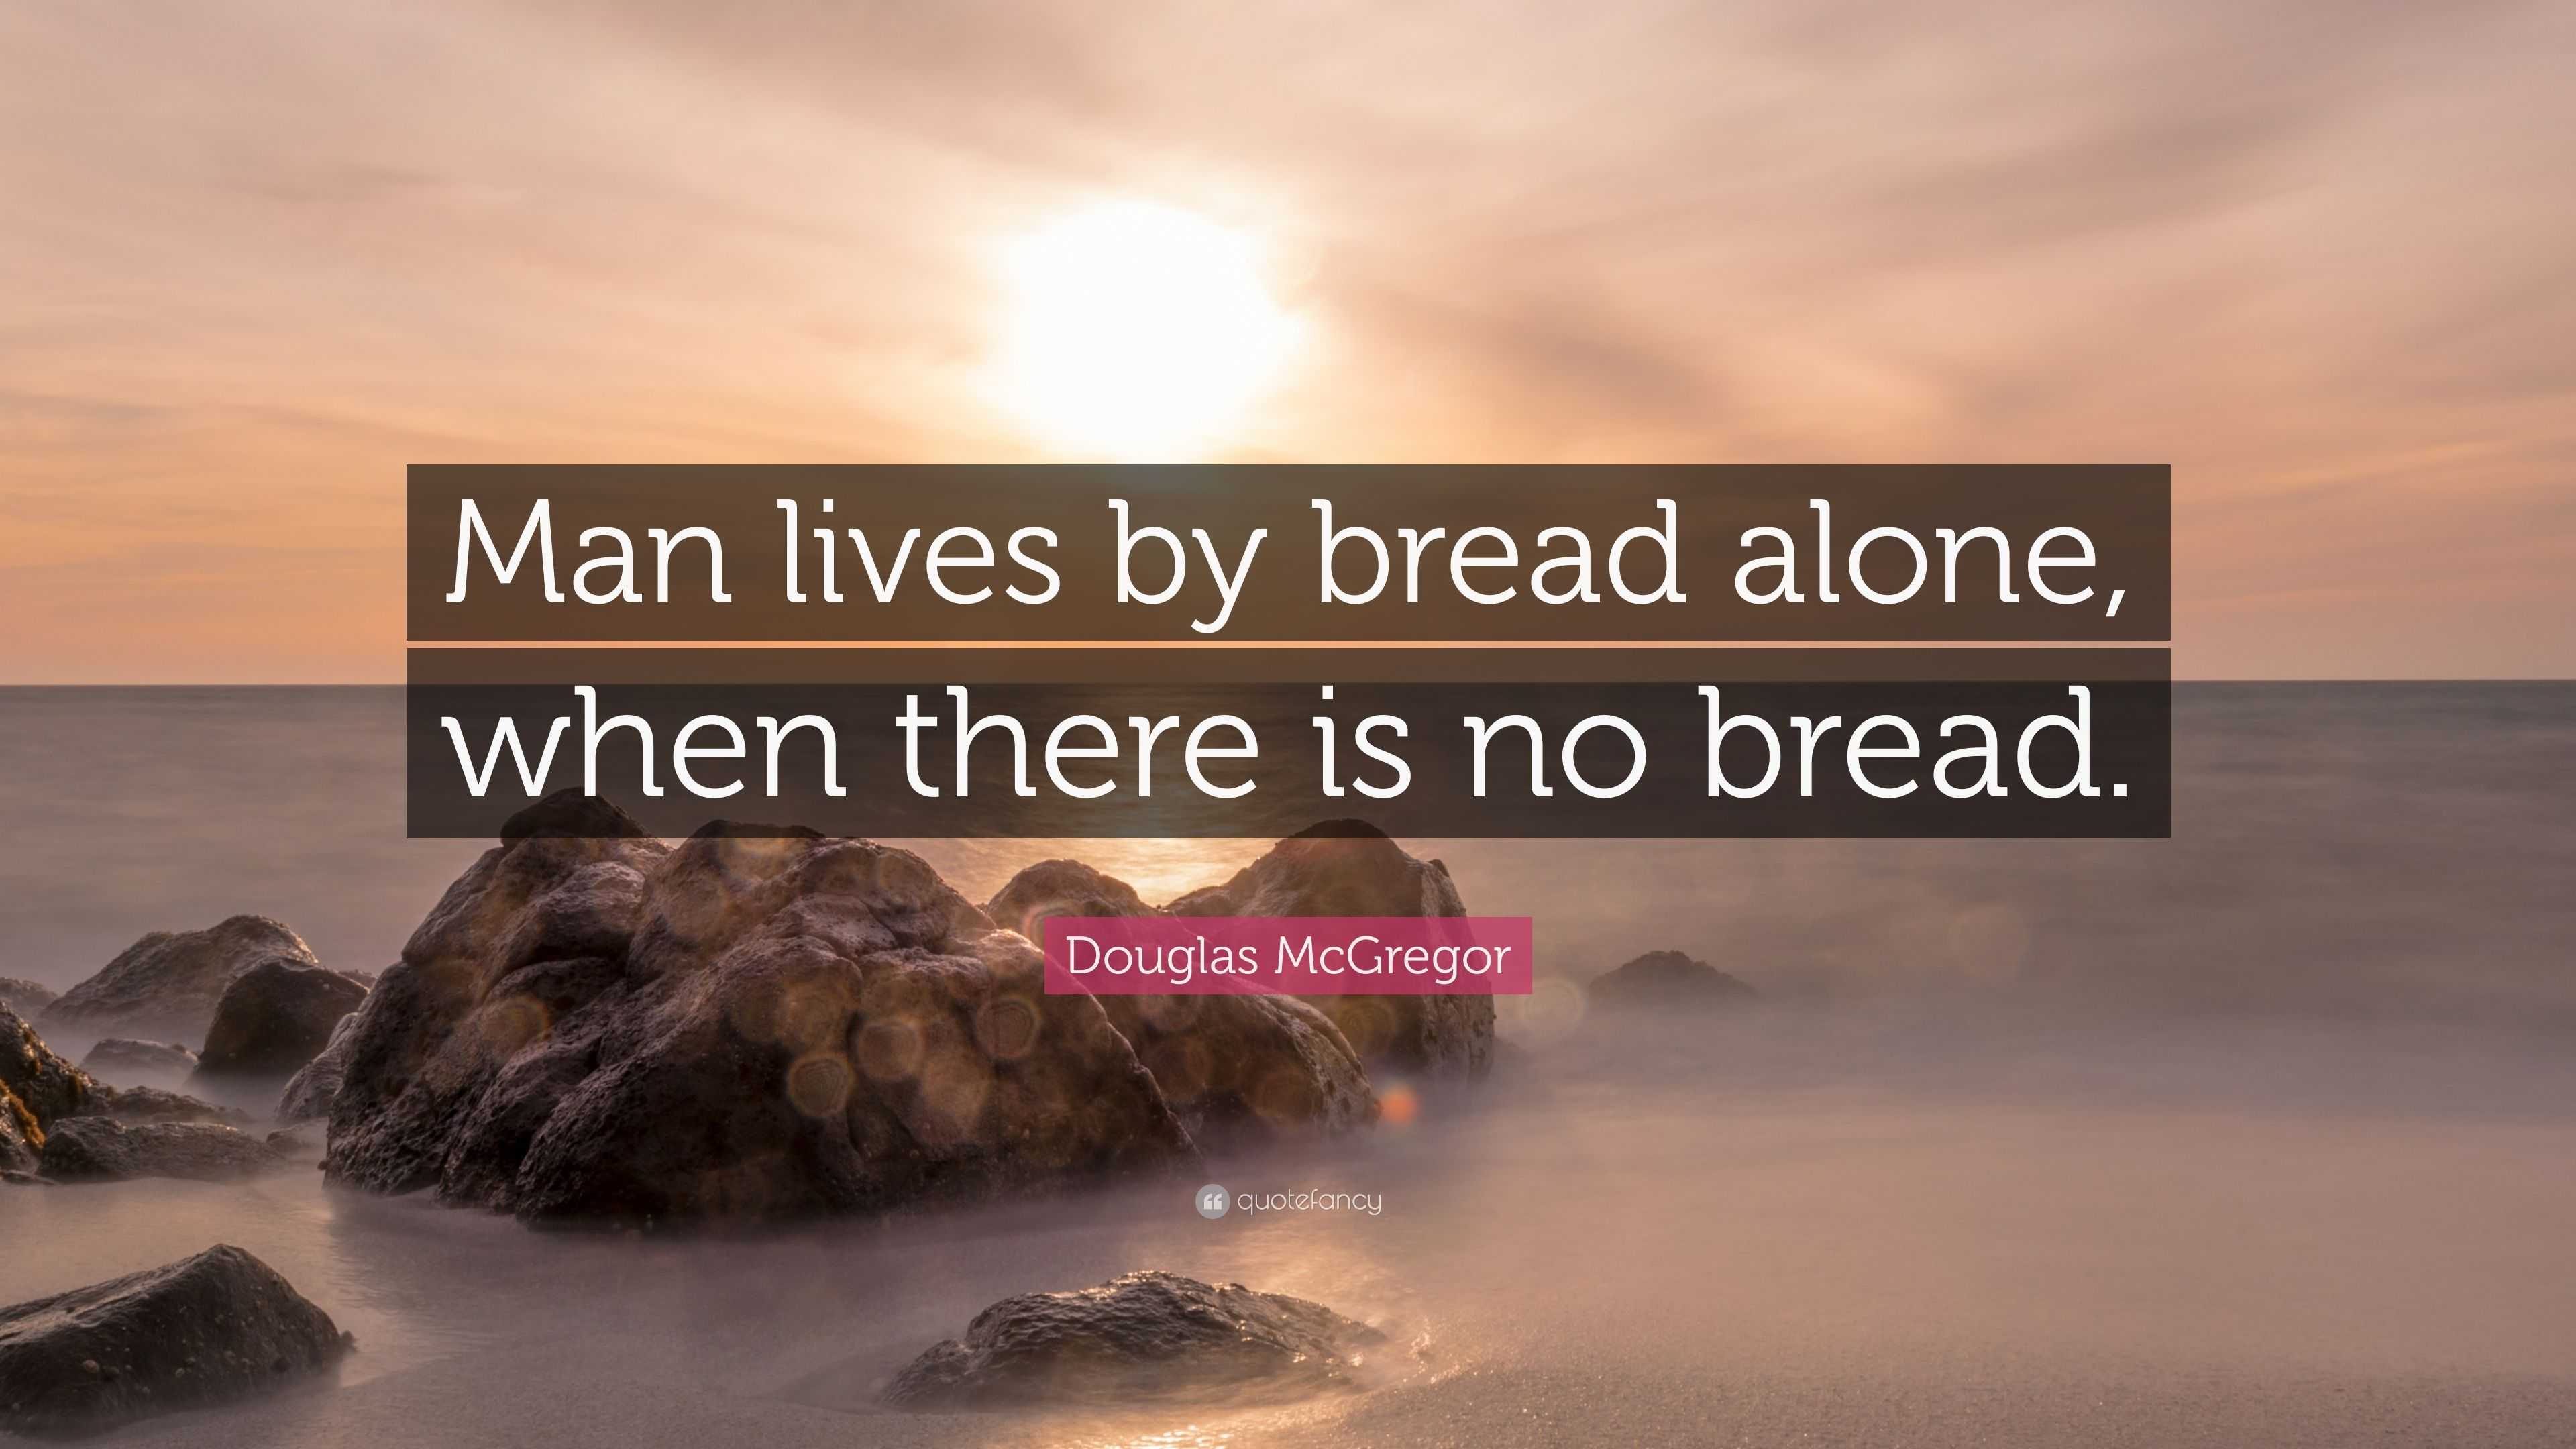 Douglas McGregor Quote: “Man lives by bread alone, when there is no bread.”